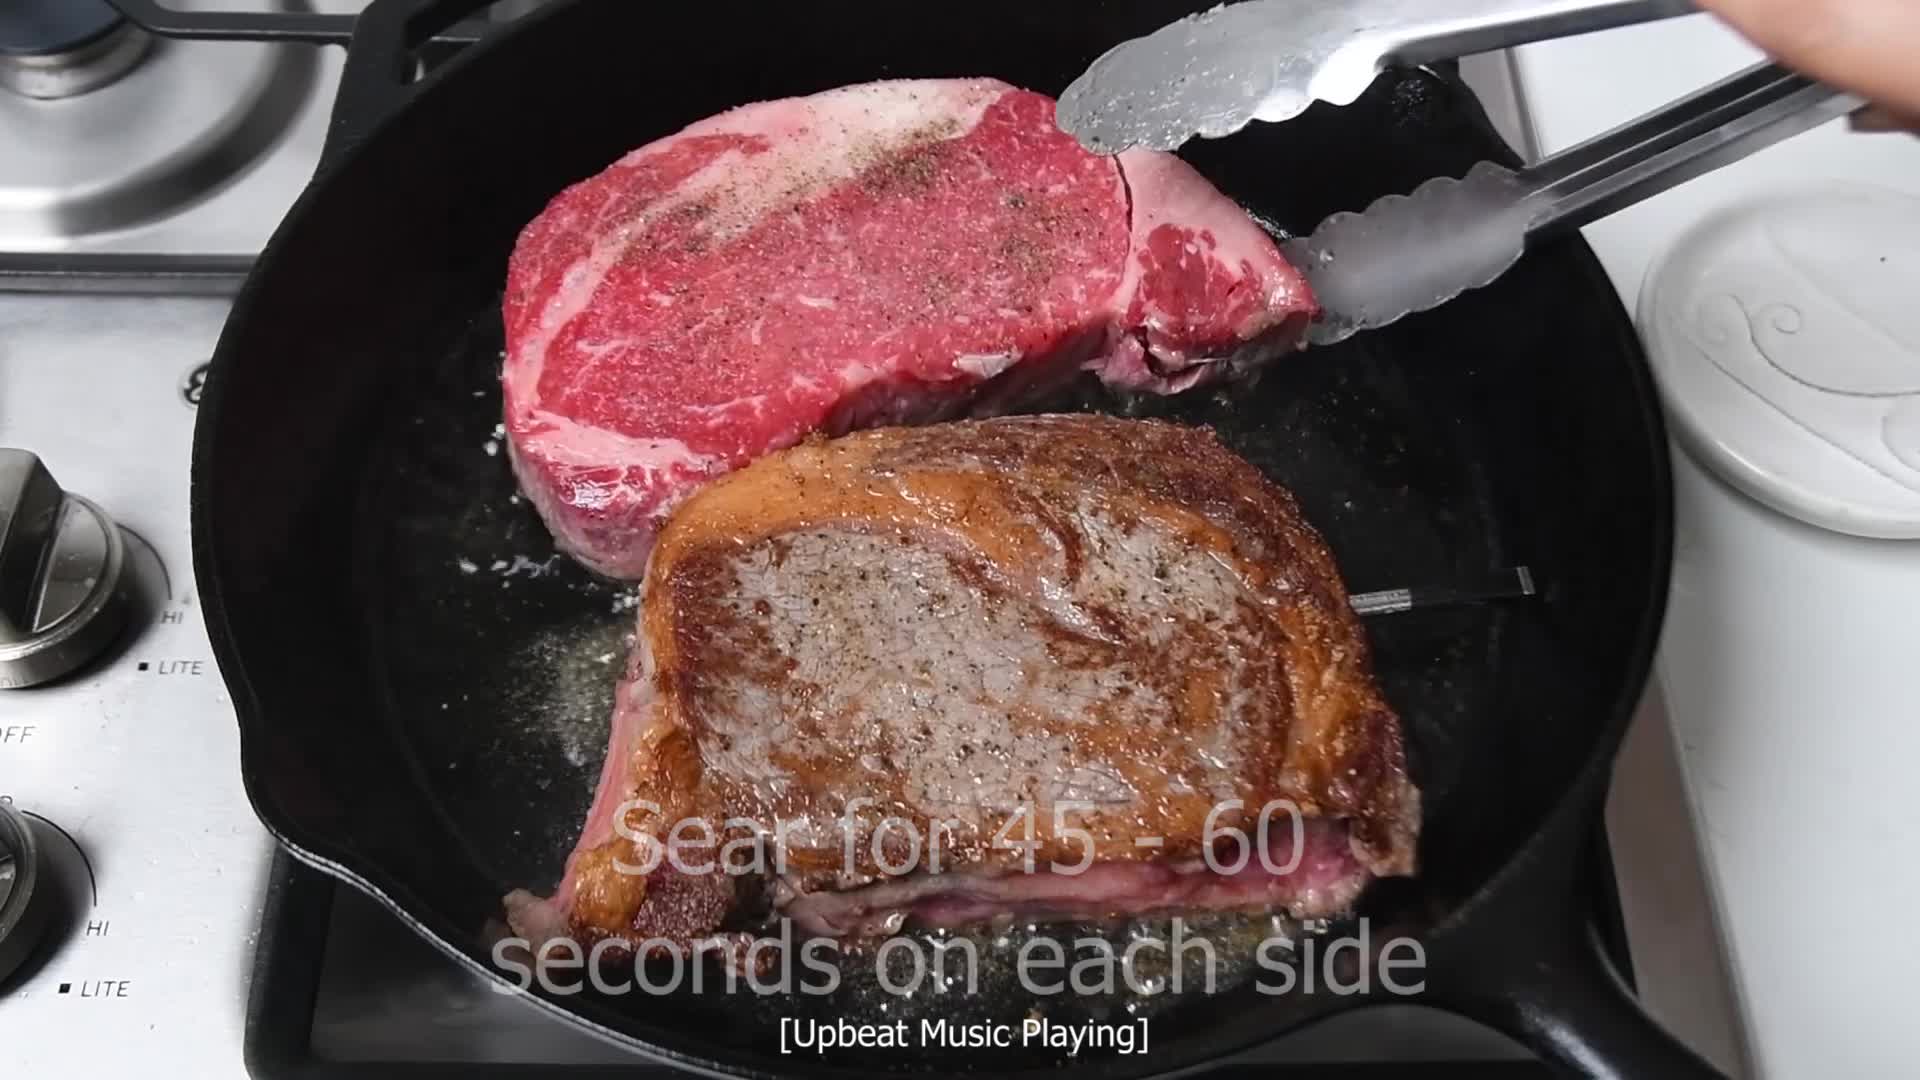 How to Cook Steak in the Oven Perfectly Every Time - The Manual